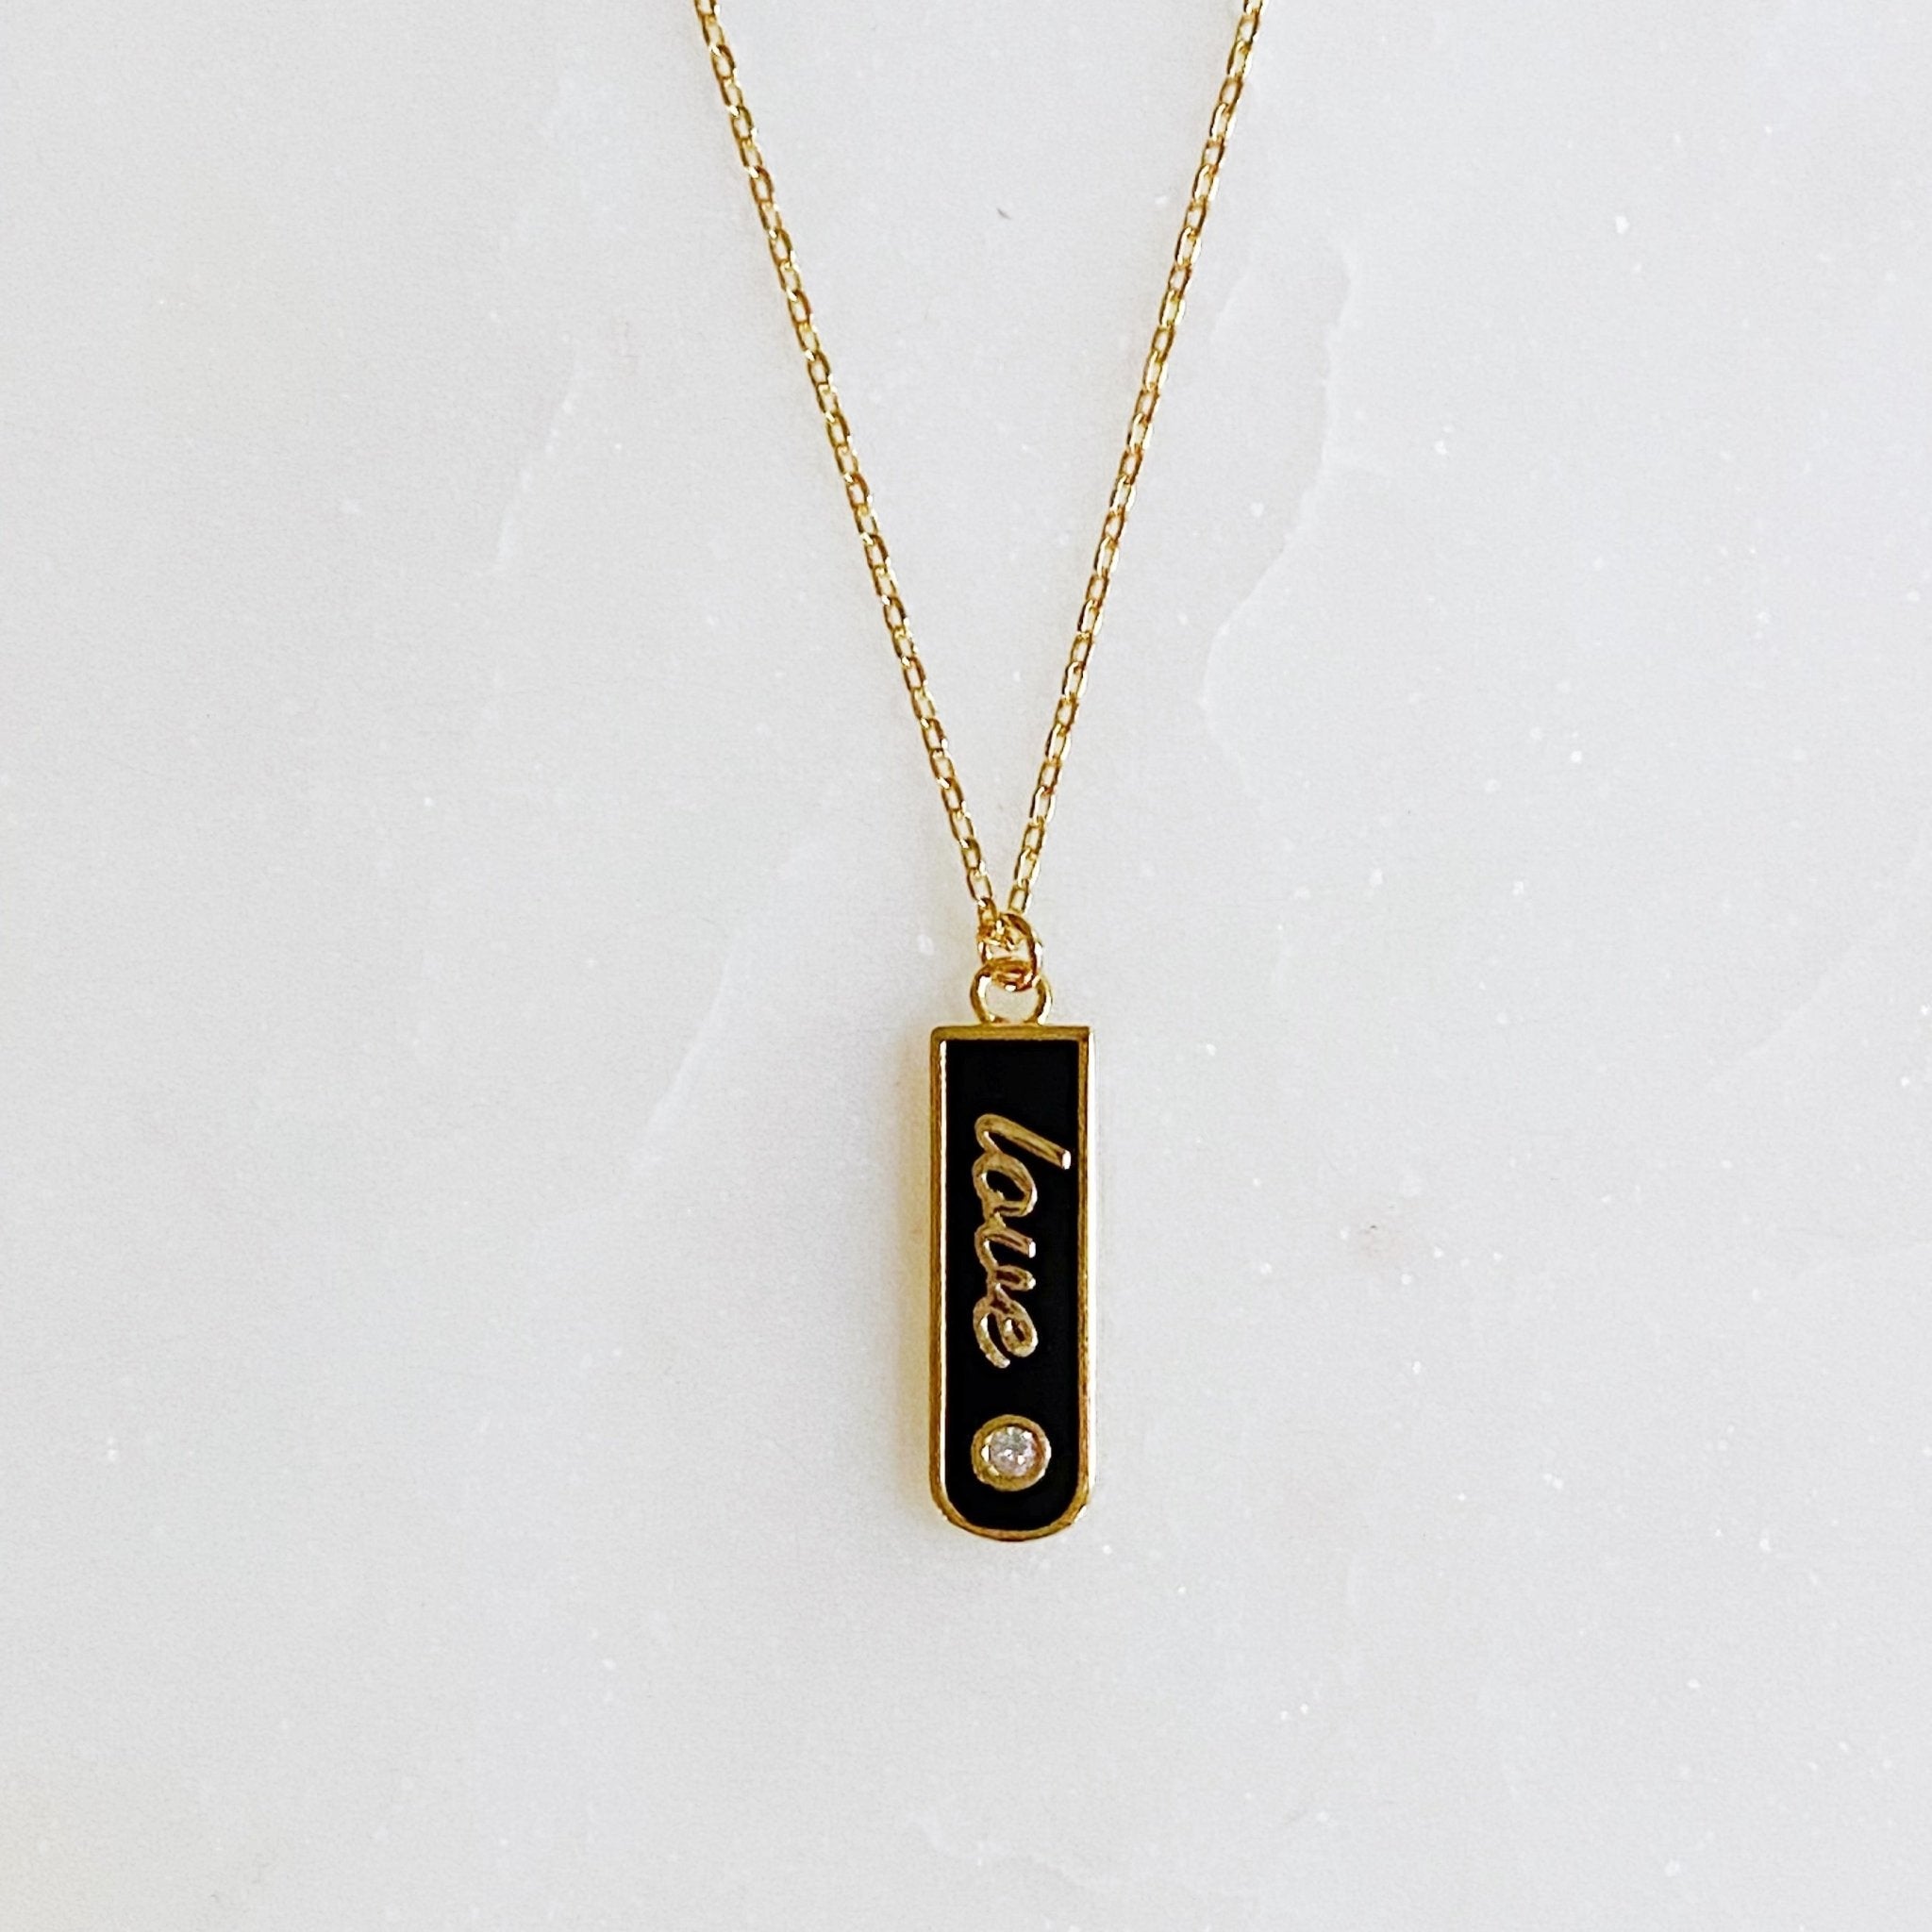 Love Drop Bar Necklace - The Kindness Cause